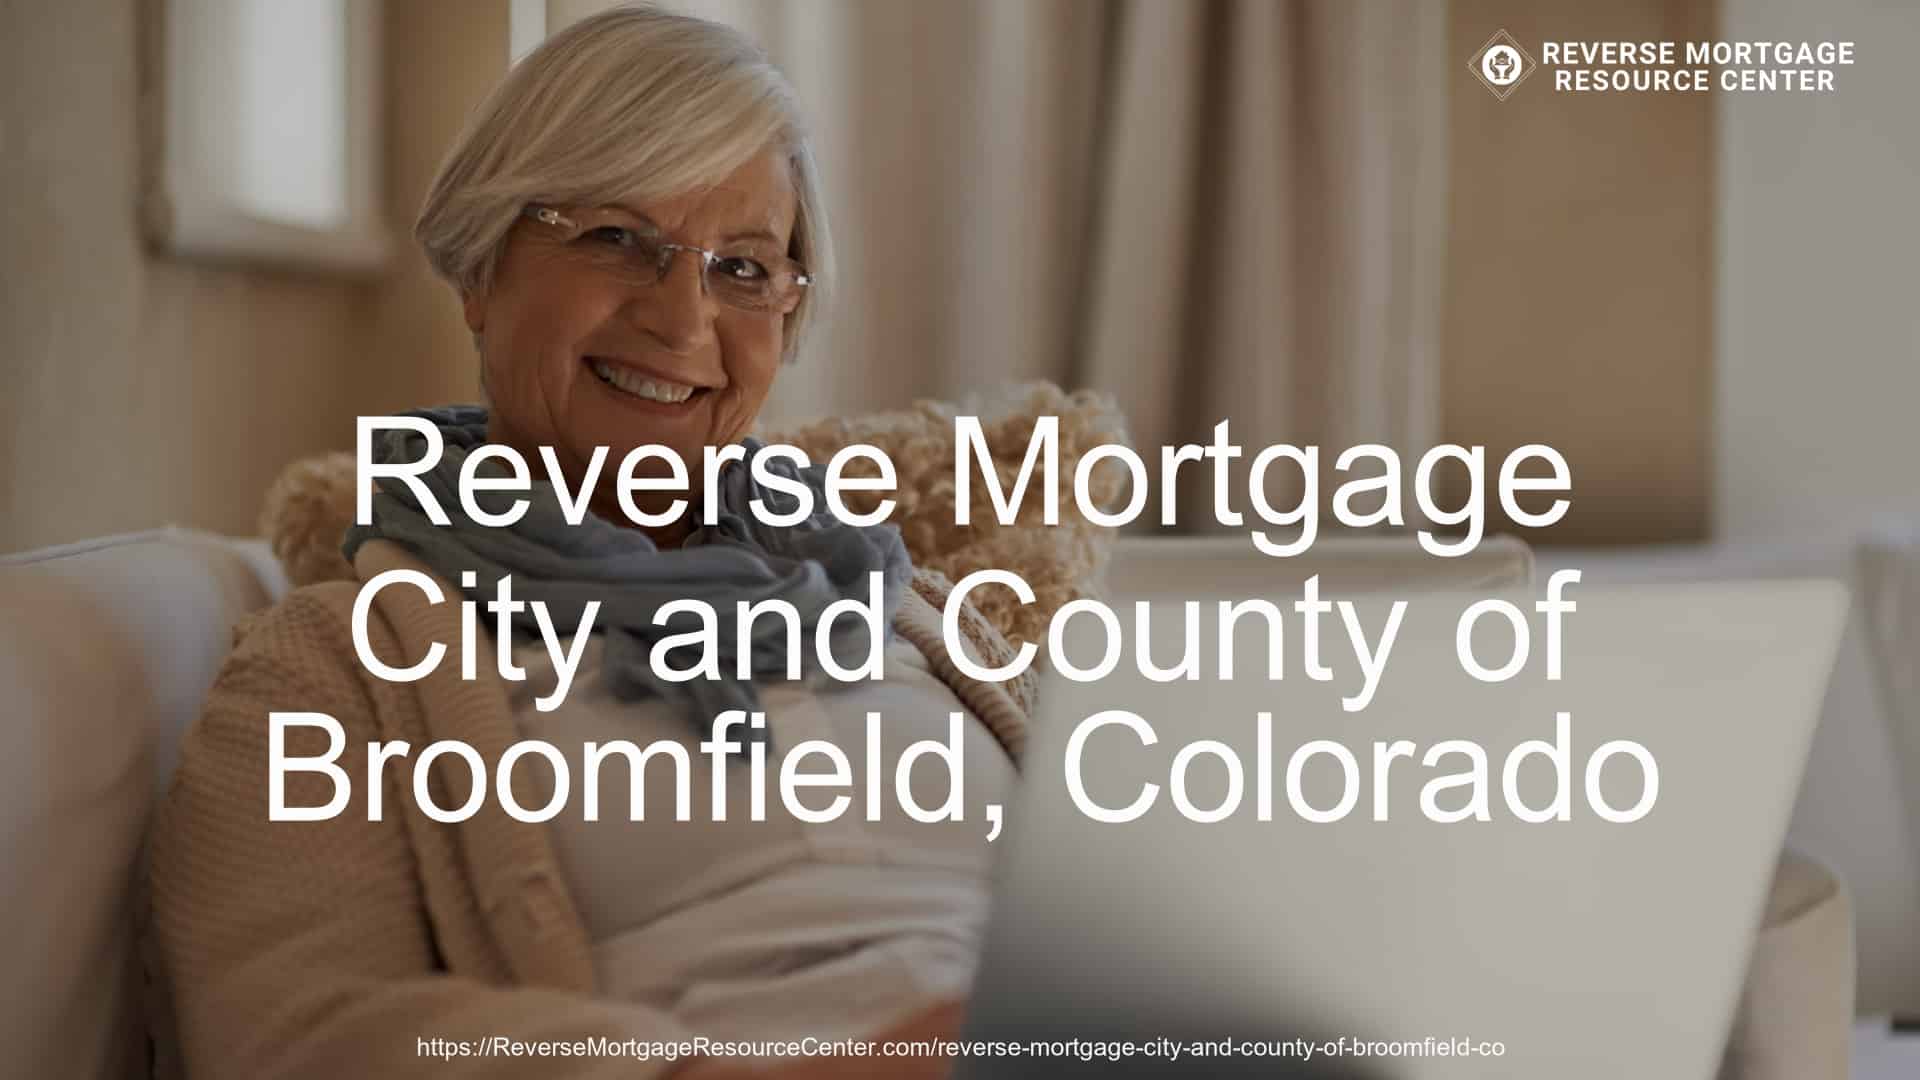 Reverse Mortgage Loans in City and County of Broomfield Colorado